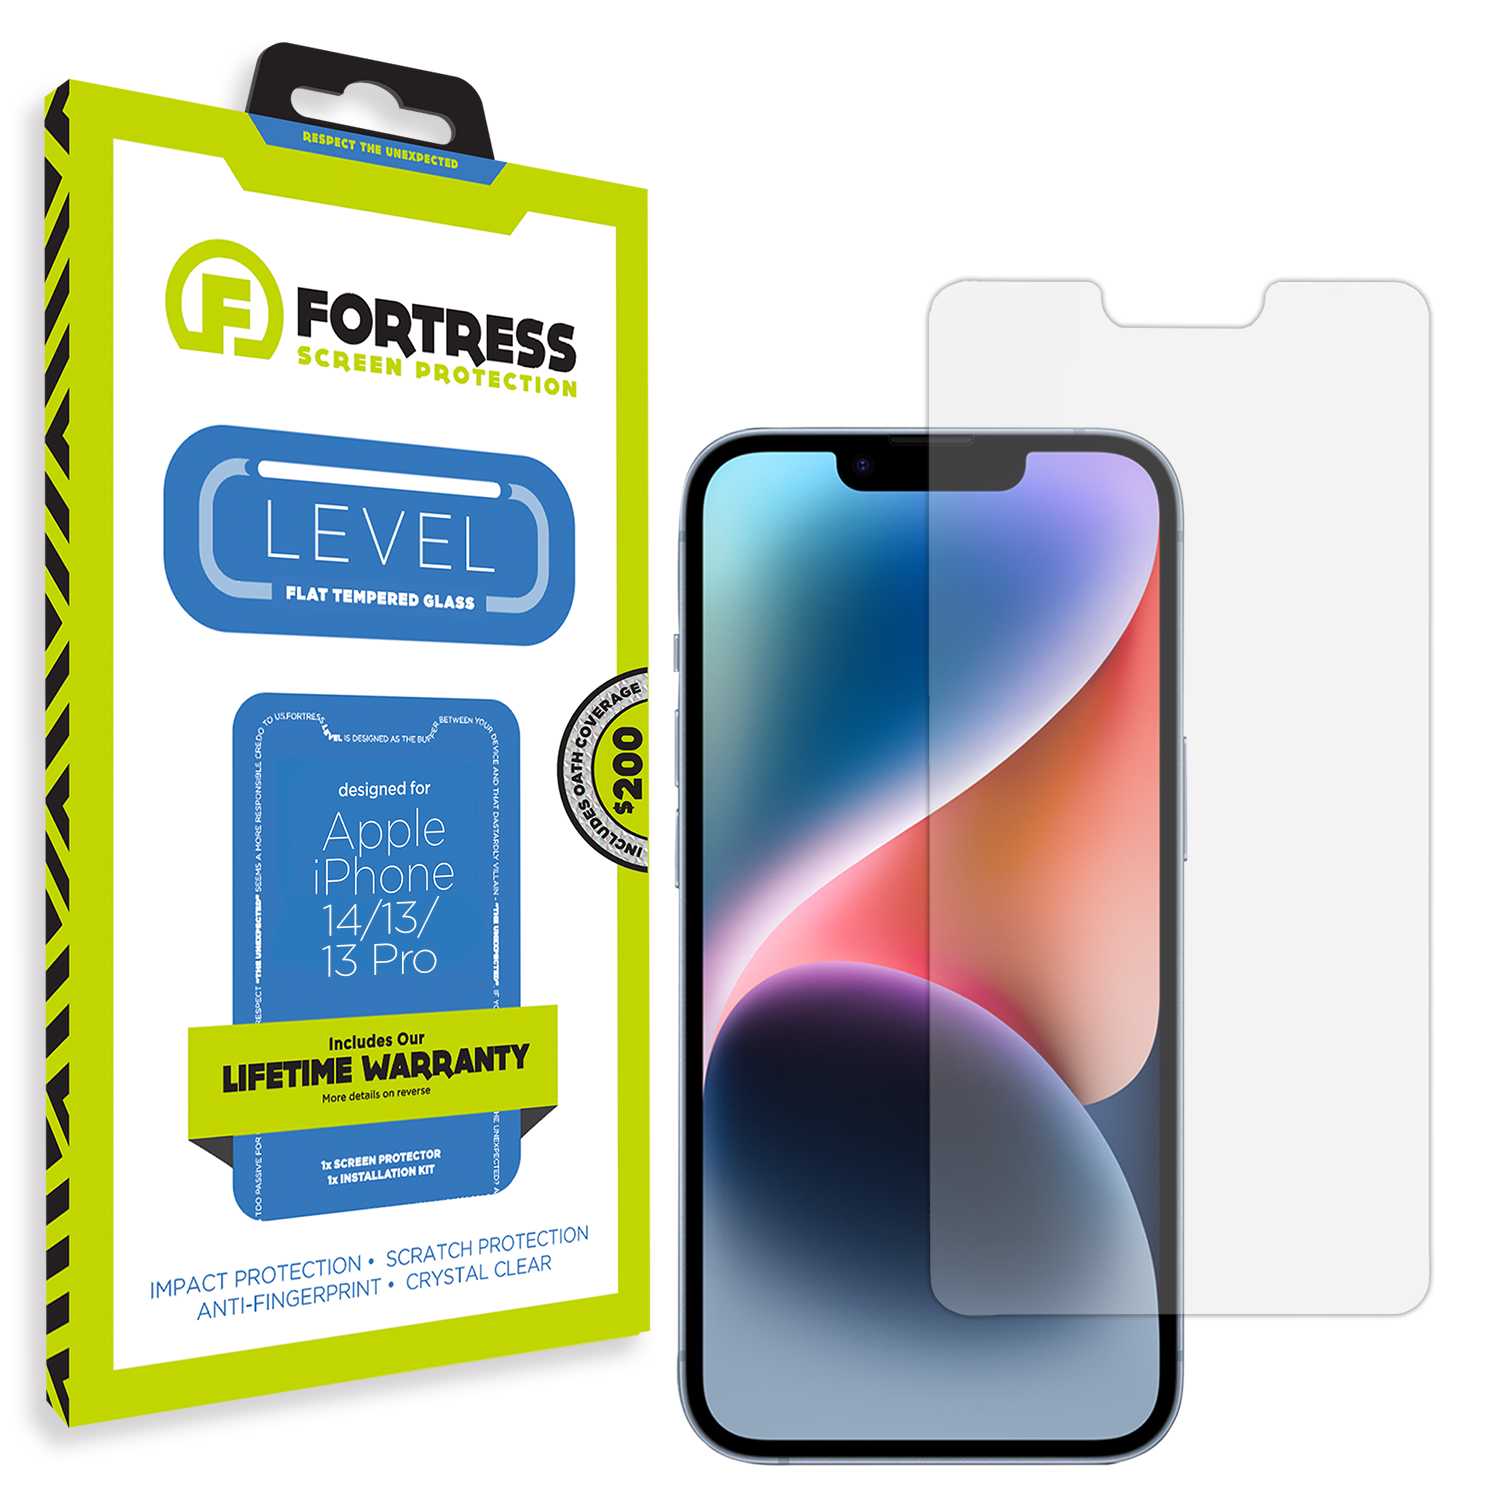 Fortress iPhone 13 Screen Protector $200Coverage Scooch Screen Protector